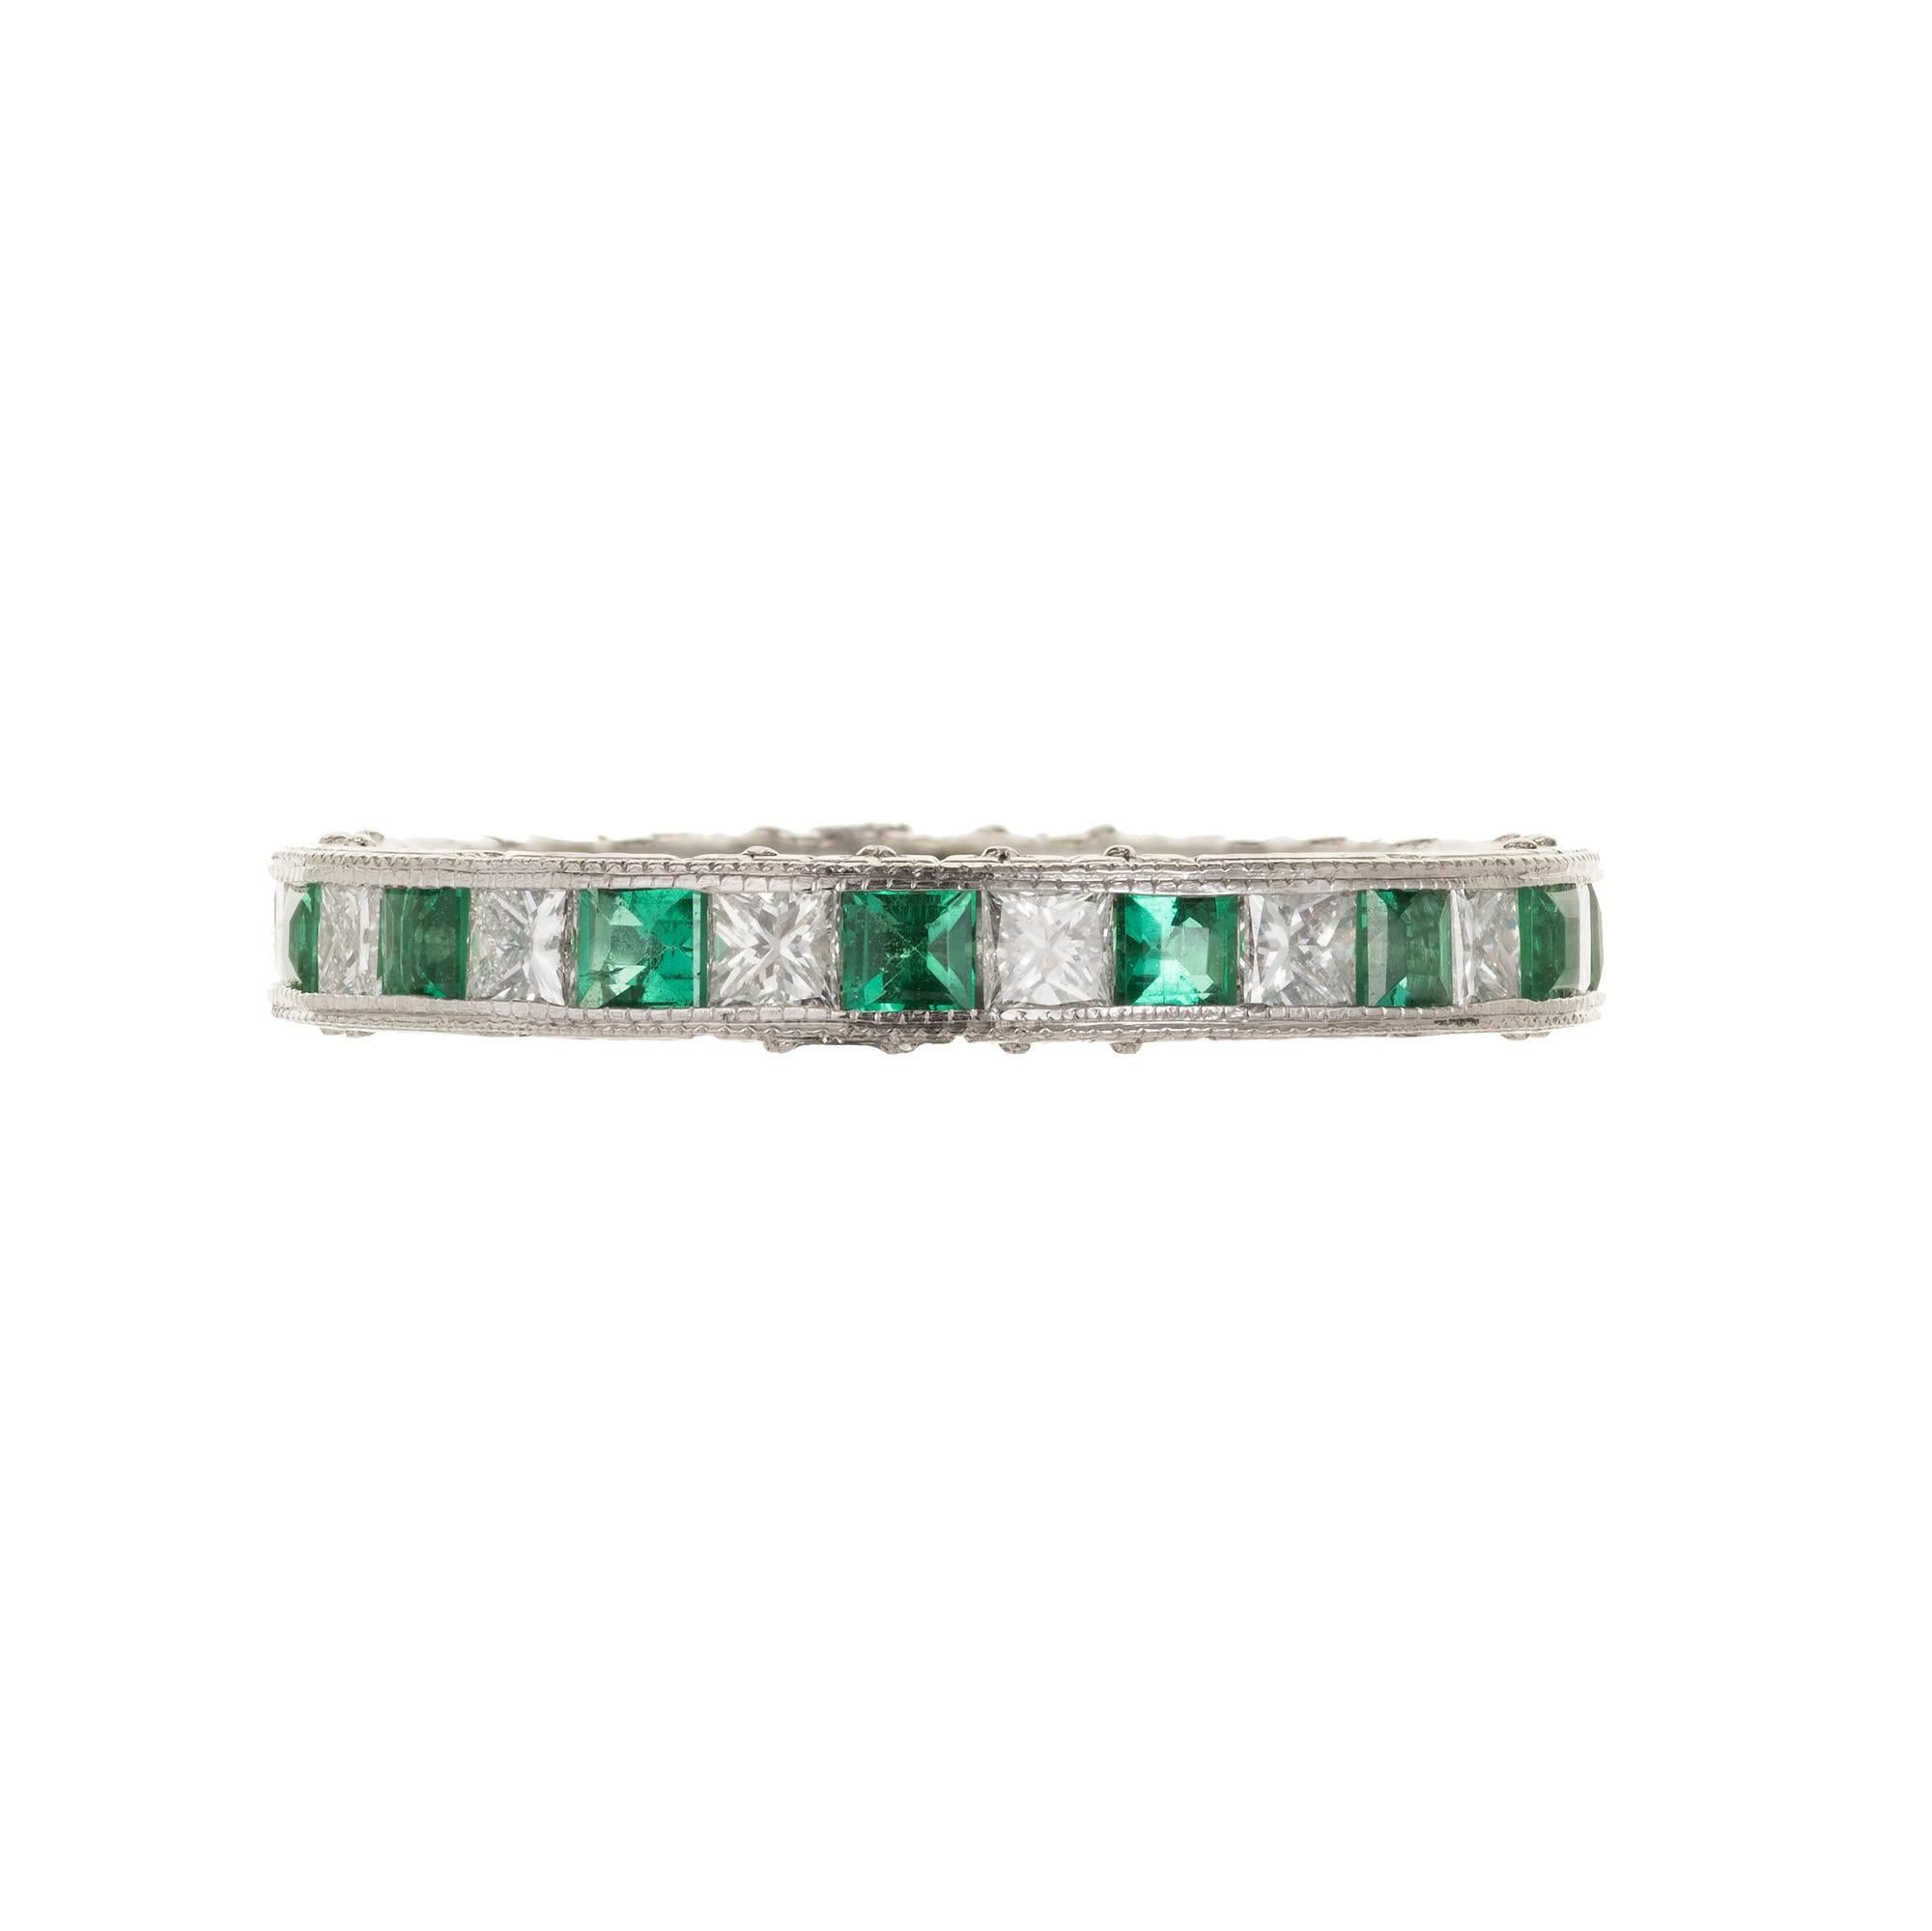 Princess cut Diamond and Emerald beaded channel set platinum wedding band from OGI with hand engraving along the setting.

15 Princess cut Diamonds, approx. total weight .85cts, F, VS
15 square cut bright green Emeralds, approx. total weight